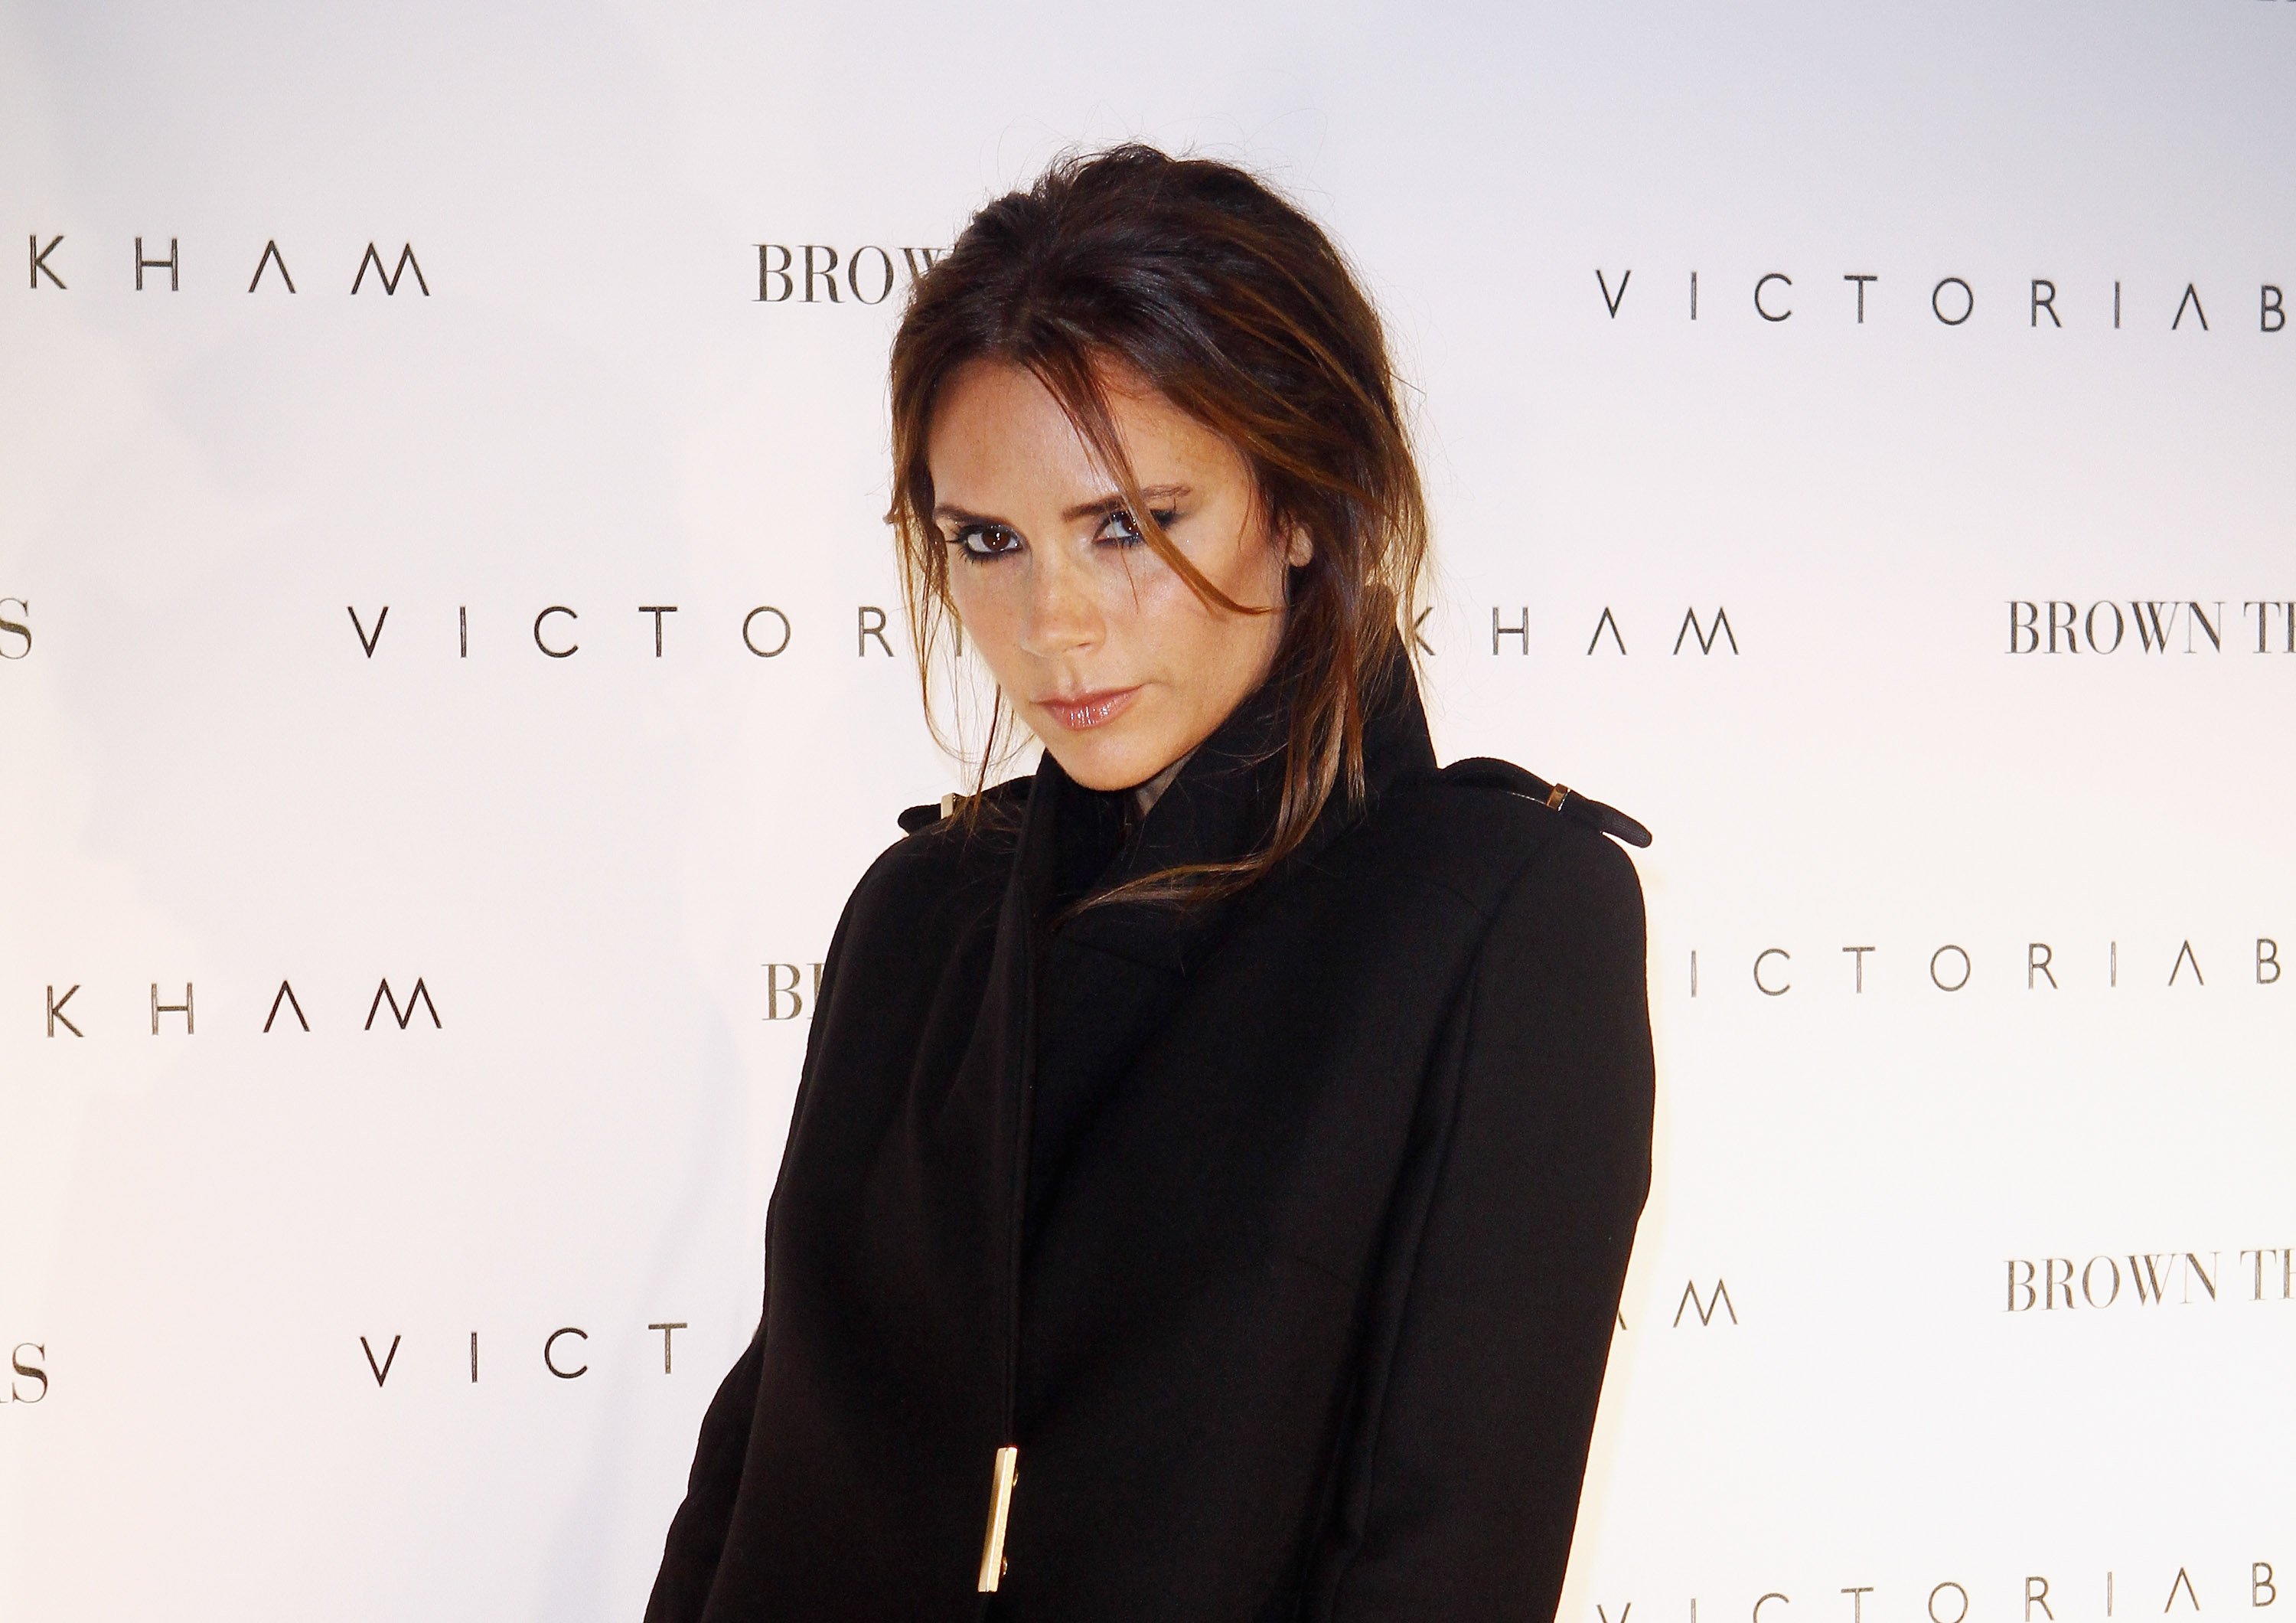 Victoria Beckham promoting her clothing collections in Ireland on July 18, 2012 | Source: Getty Images